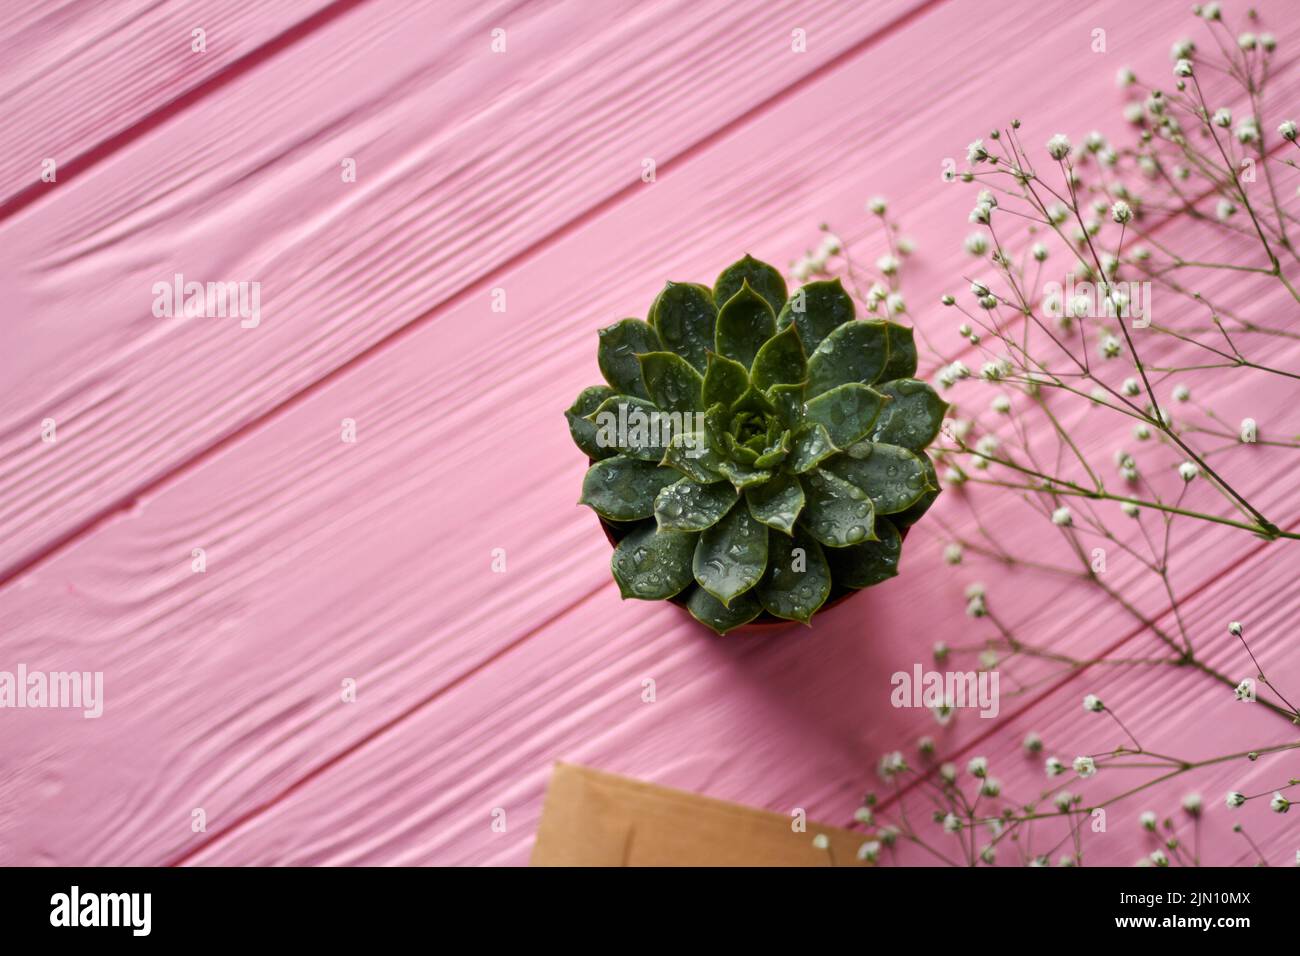 Top view sempervivum plant with water drops. Pink wooden background. Stock Photo